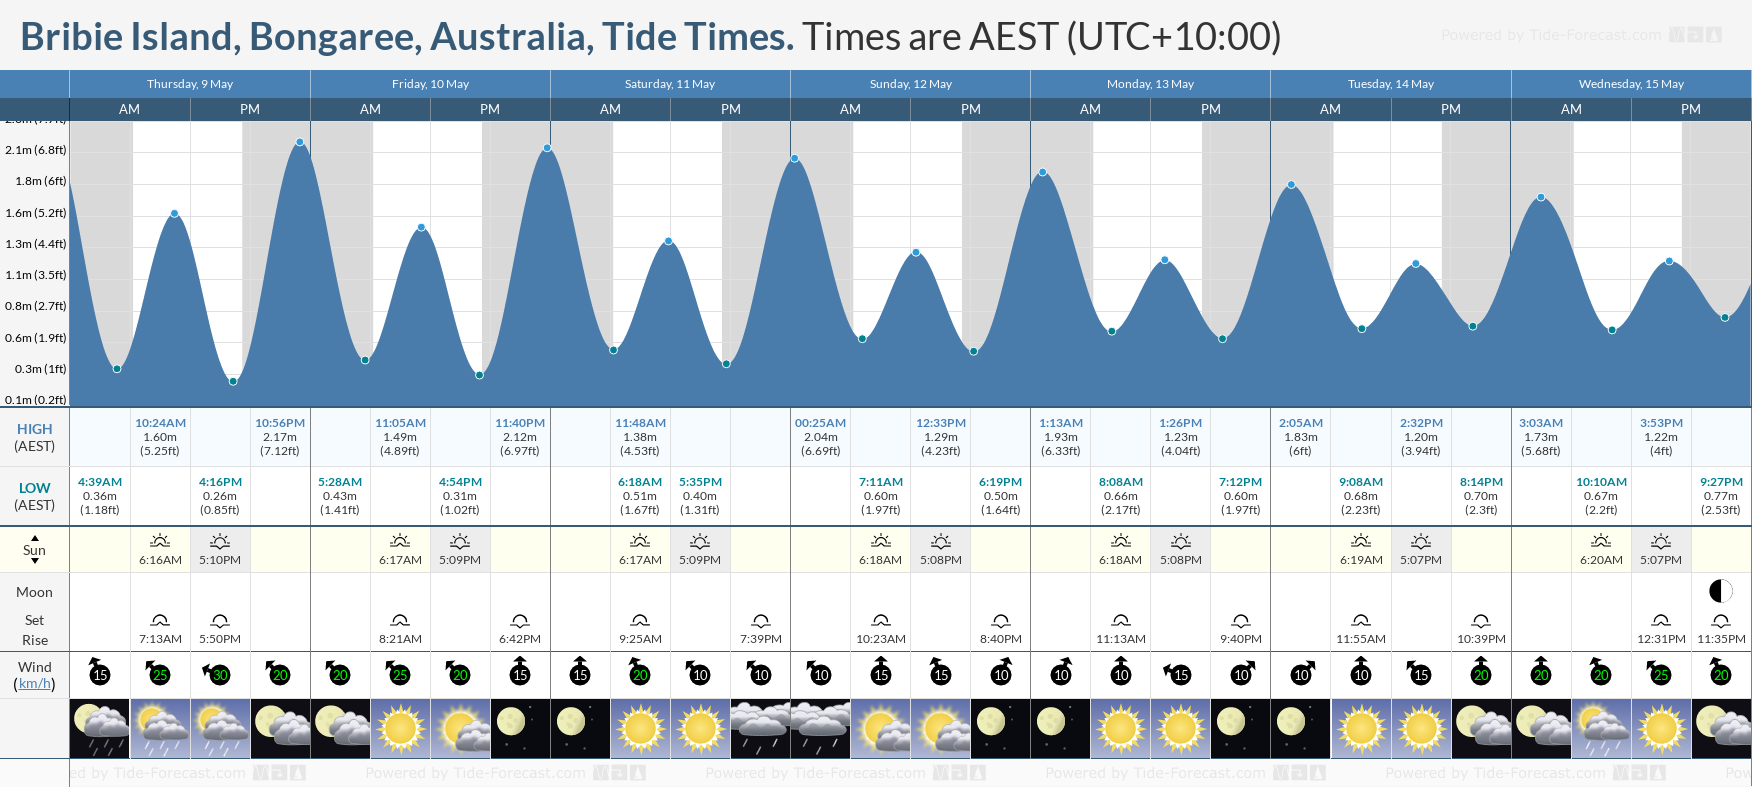 Bribie Island, Bongaree, Australia Tide Chart including high and low tide tide times for the next 7 days